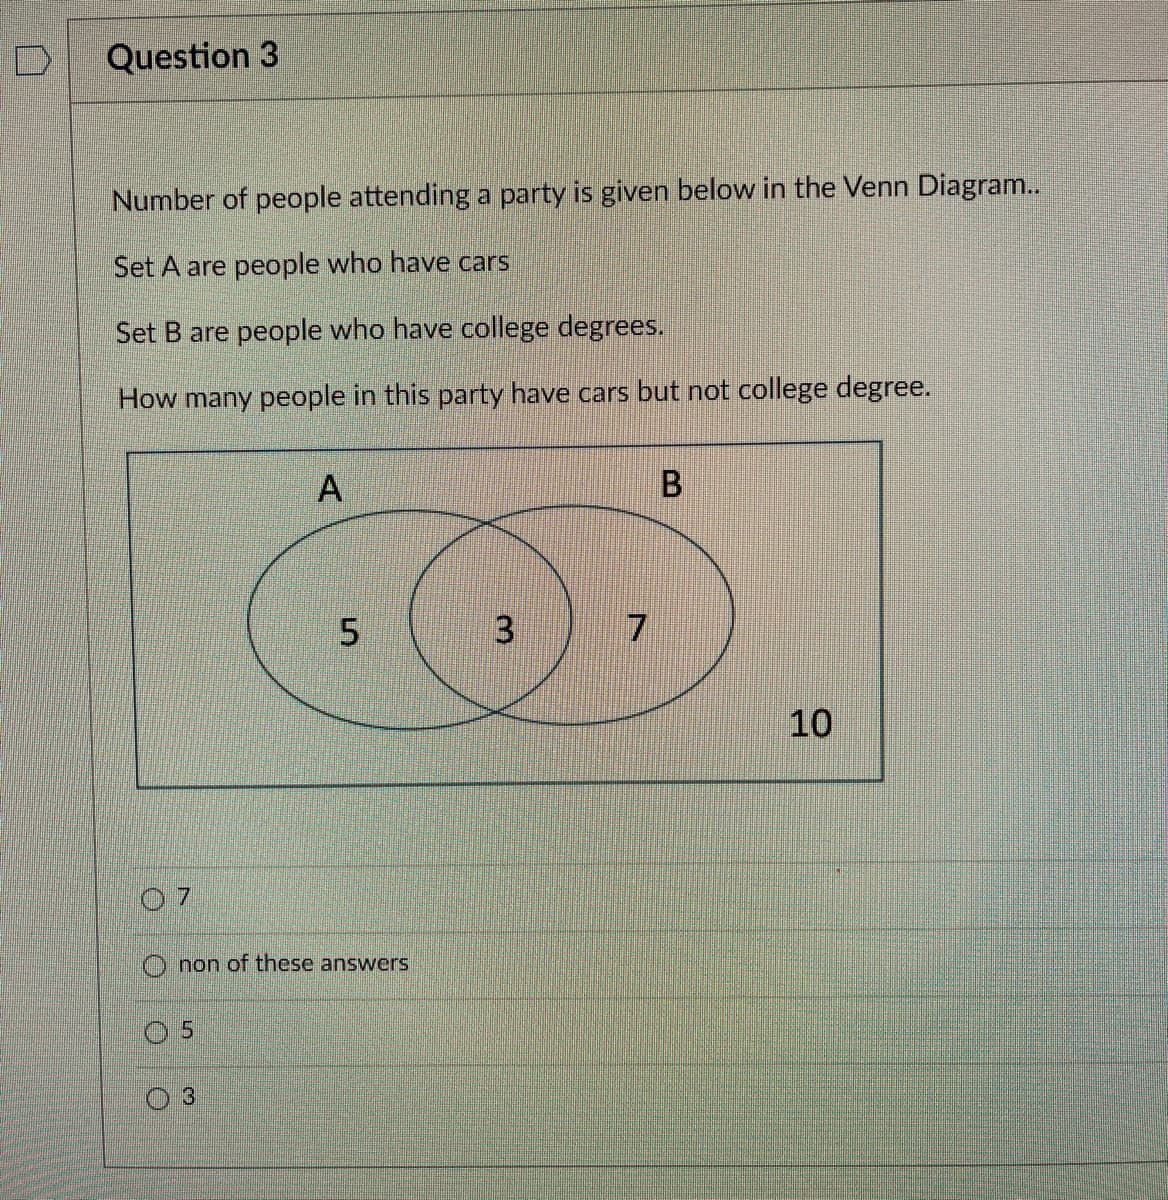 Question 3
Number of people attending a party is given below in the Venn Diagram..
Set A are people who have cars
Set B are people who have college degrees.
How many people in this party have cars but not college degree.
07
5
A
Onon of these answers
3
5
3
7
B
10